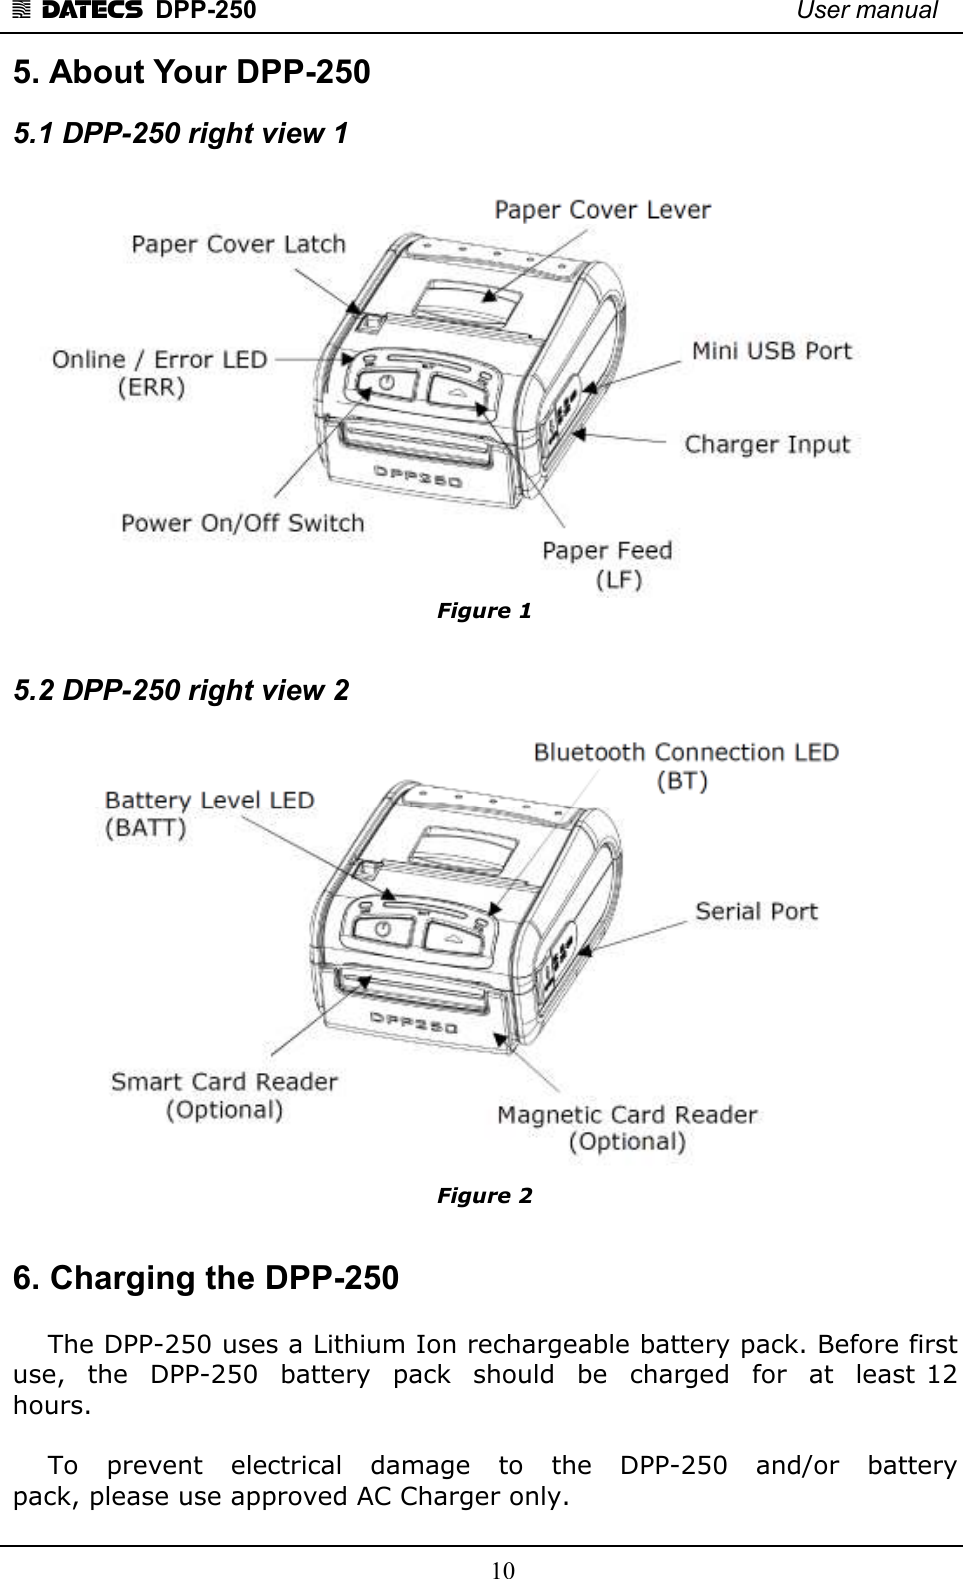 1 DATECS  DPP-250    User manual     10 5. About Your DPP-250 5.1 DPP-250 right view 1   Figure 1  5.2 DPP-250 right view 2   Figure 2  6. Charging the DPP-250      The DPP-250 uses a Lithium Ion rechargeable battery pack. Before first  use,  the  DPP-250  battery  pack  should  be  charged  for  at  least 12 hours.       To    prevent    electrical    damage    to    the    DPP-250    and/or    battery  pack, please use approved AC Charger only. 